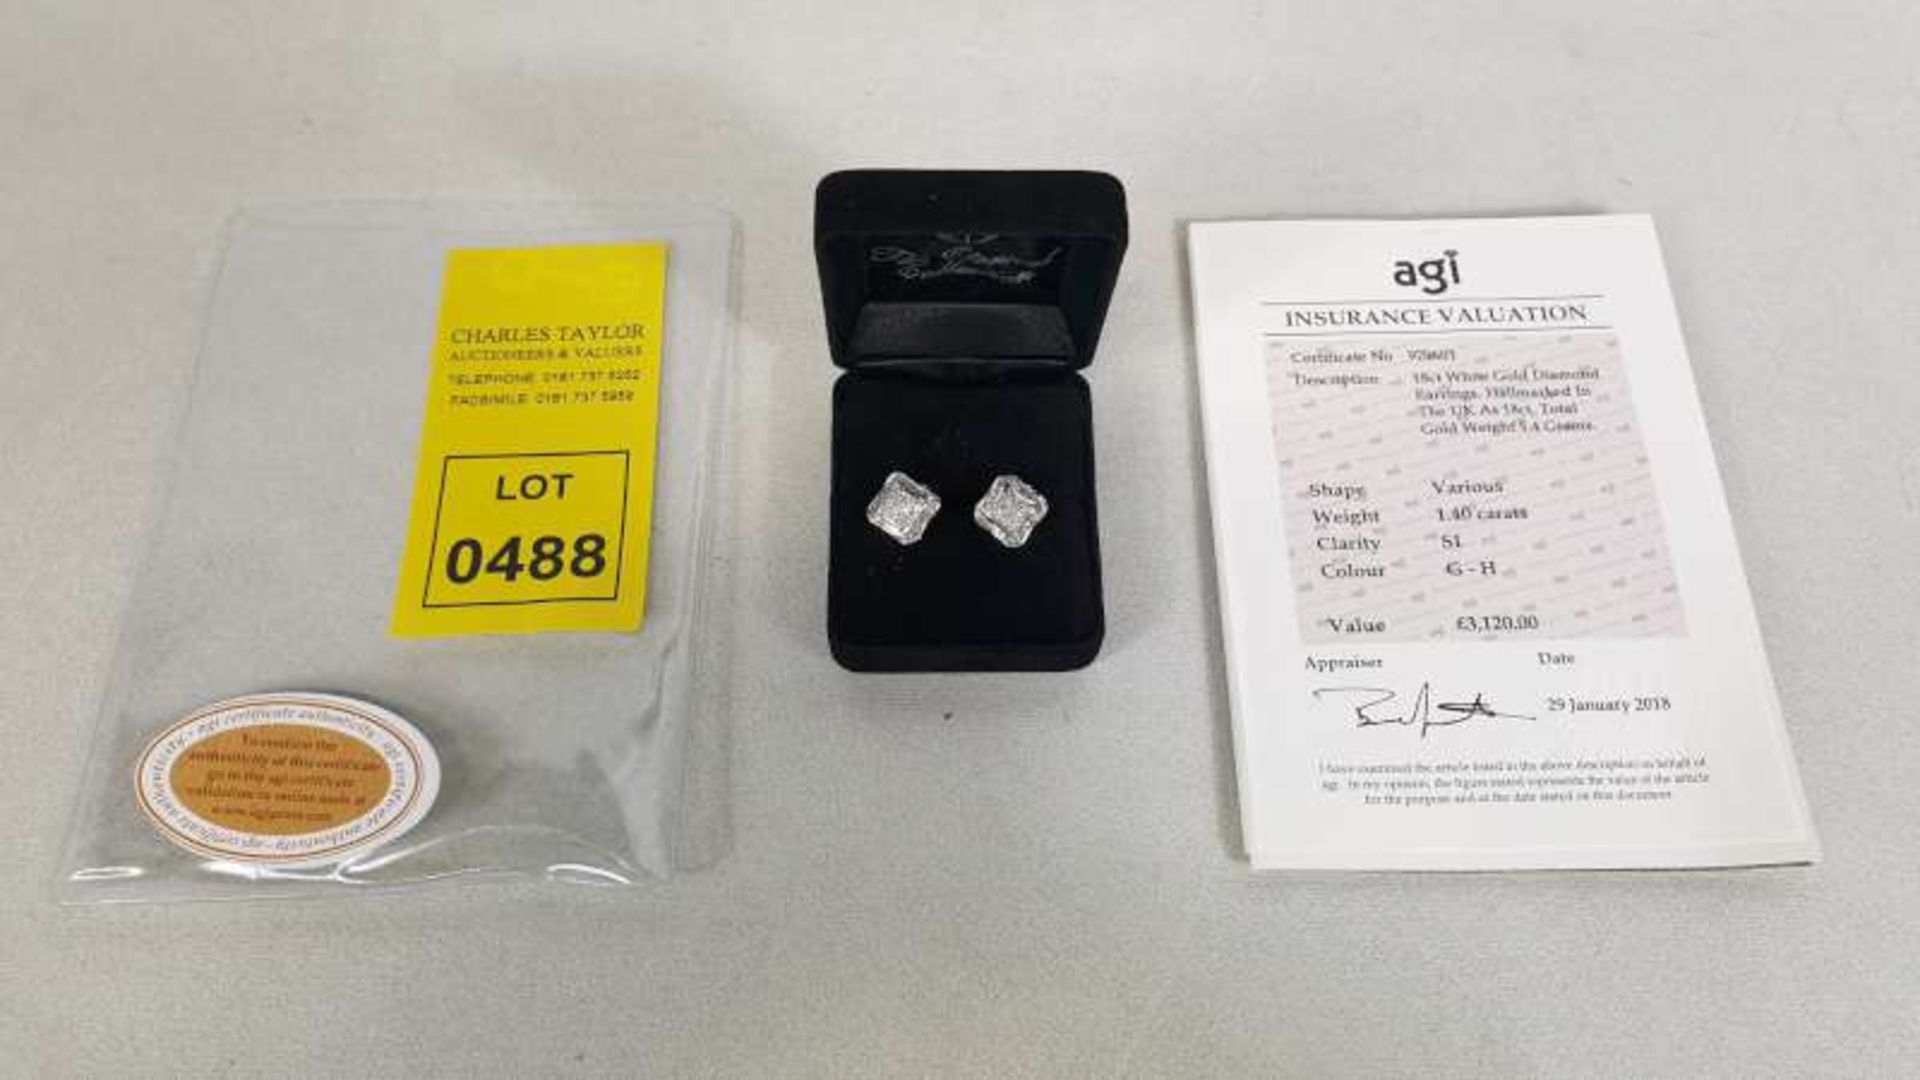 1.4CT G SI DIAMOND EARRINGS SET IN 18CT WHITE GOLD WITH CERTIFICATION REF AGI / 979601 INSURANCE